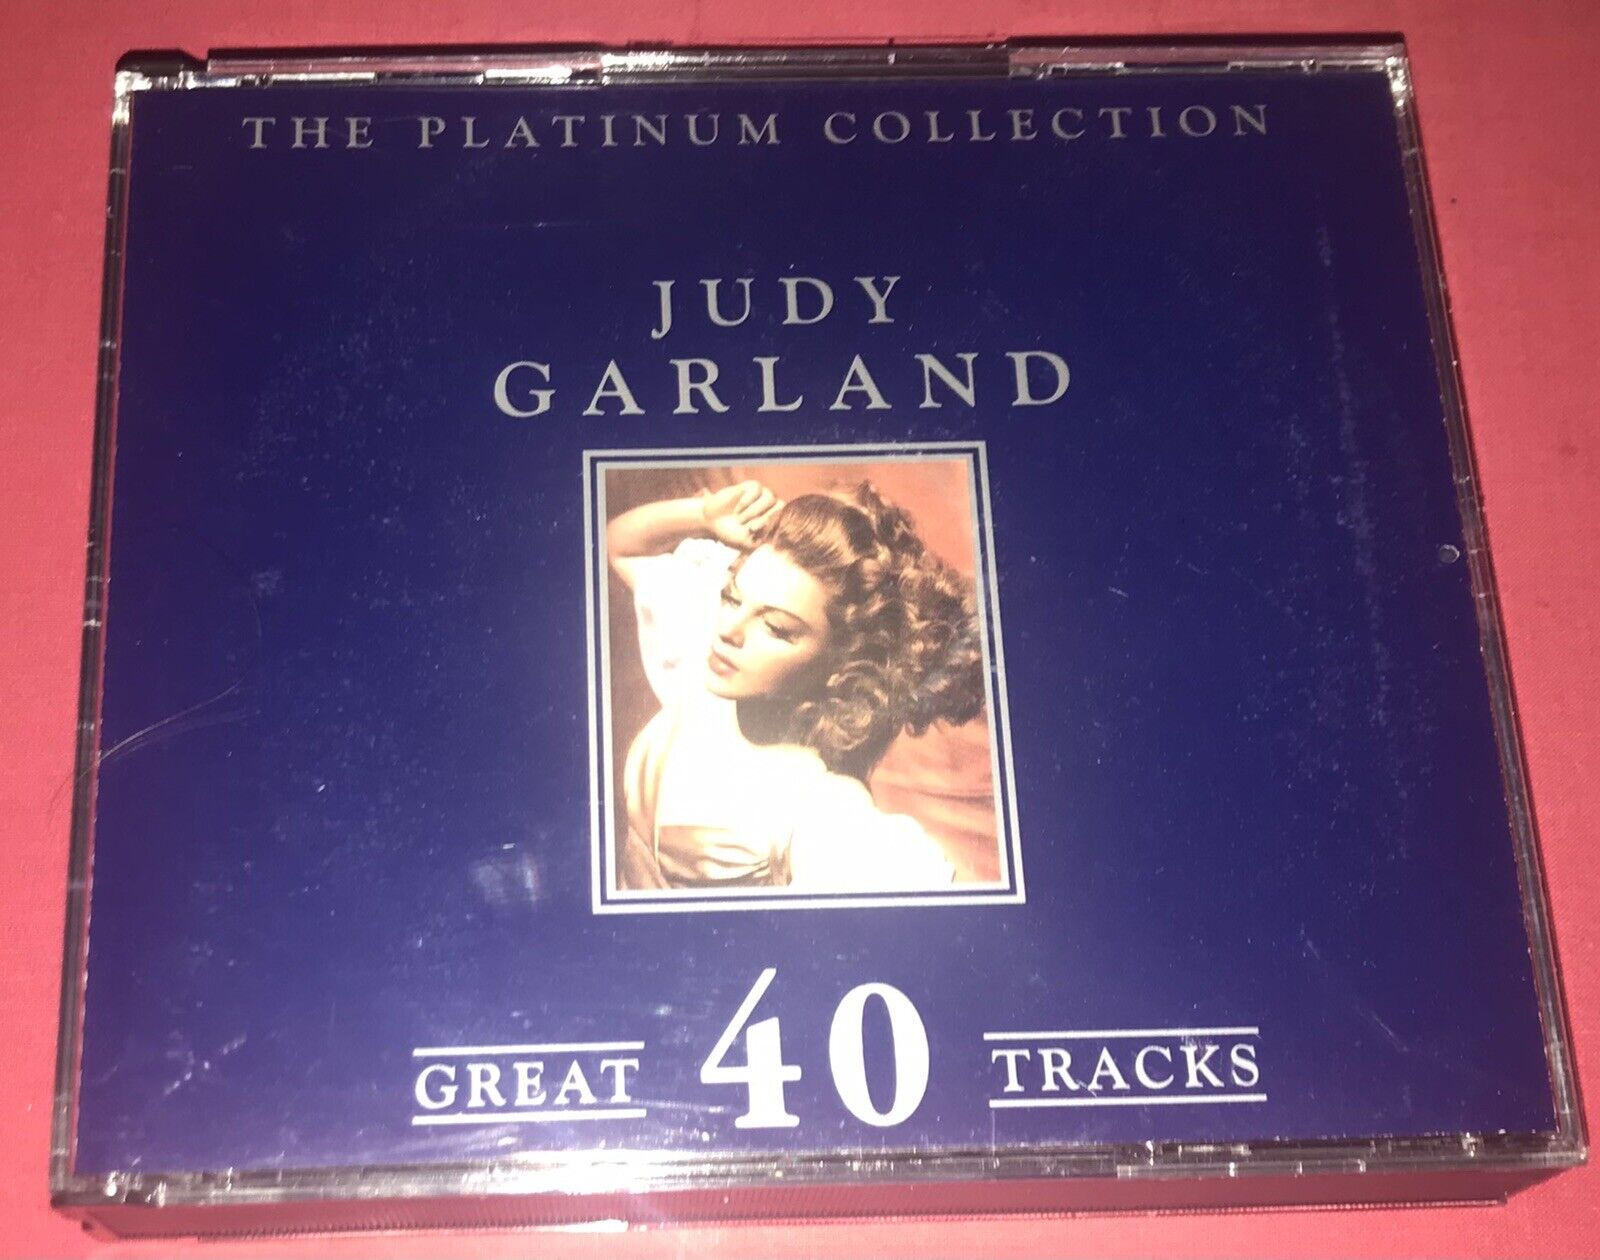 TWO CD BOX SET  - Judy Garland - The Platinum Collection - 40 Classic Tracks